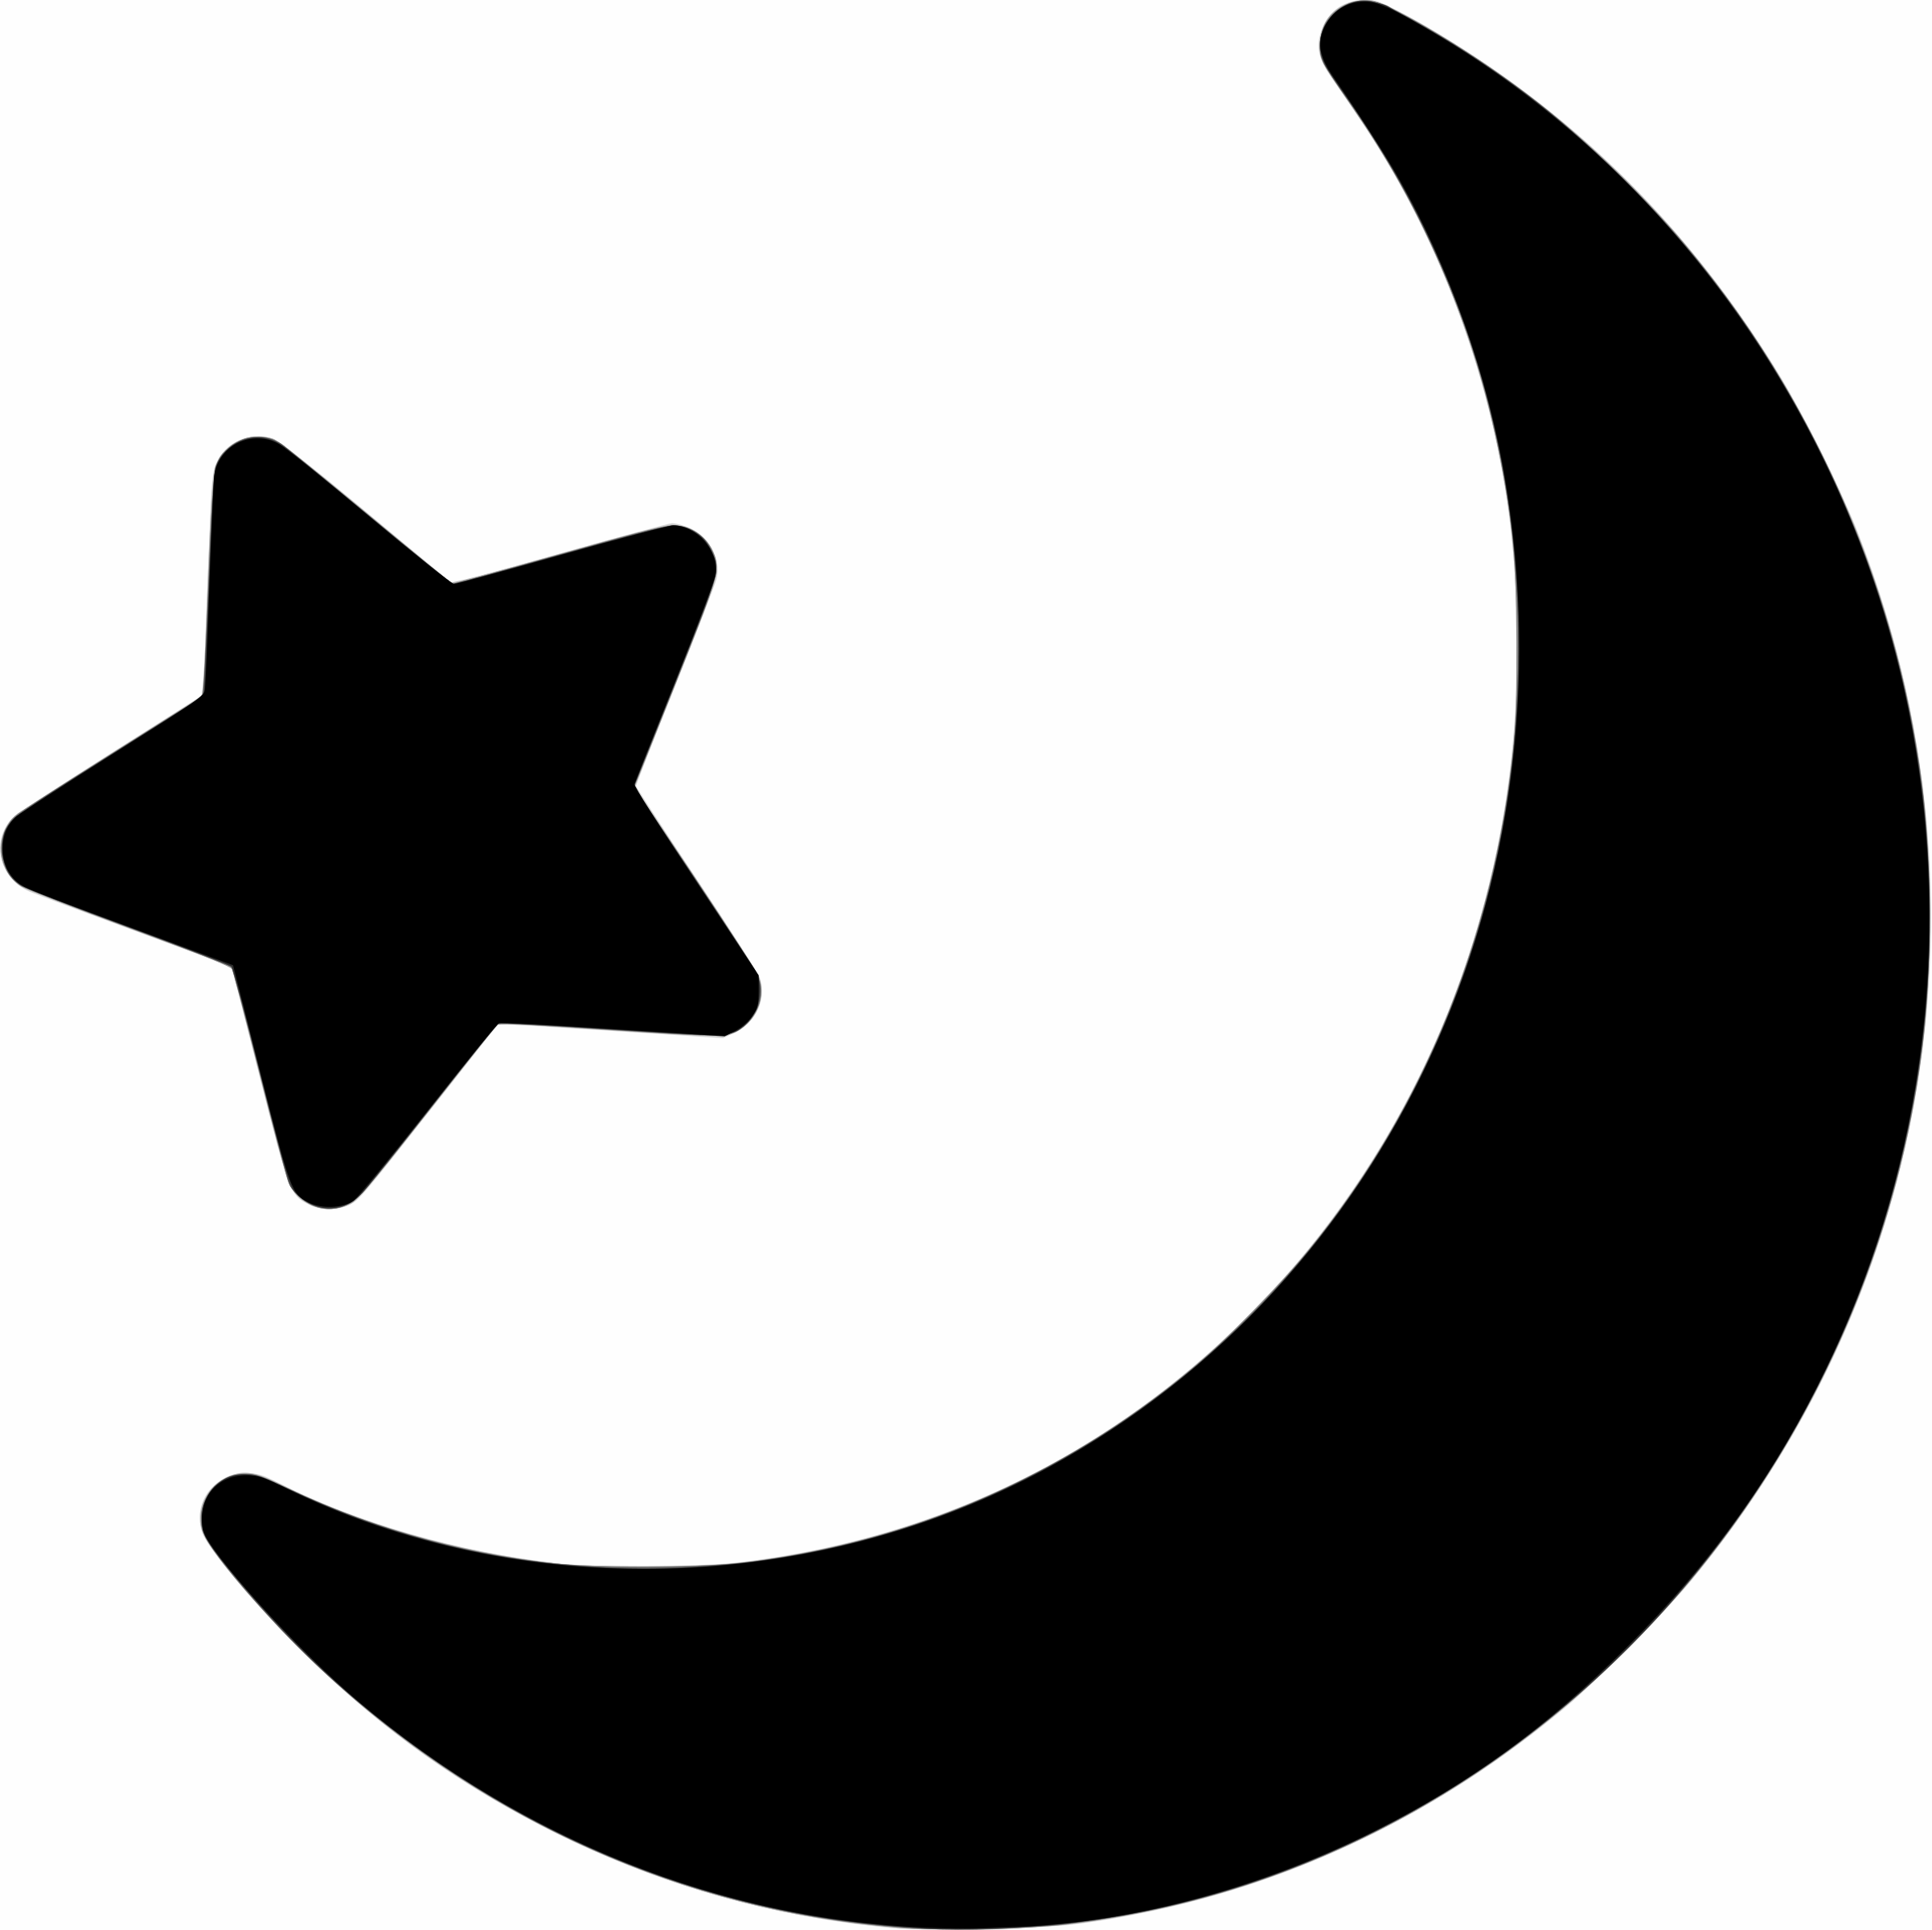 Clipart - Moon And Star Icon - Moon And Stars Clip Art